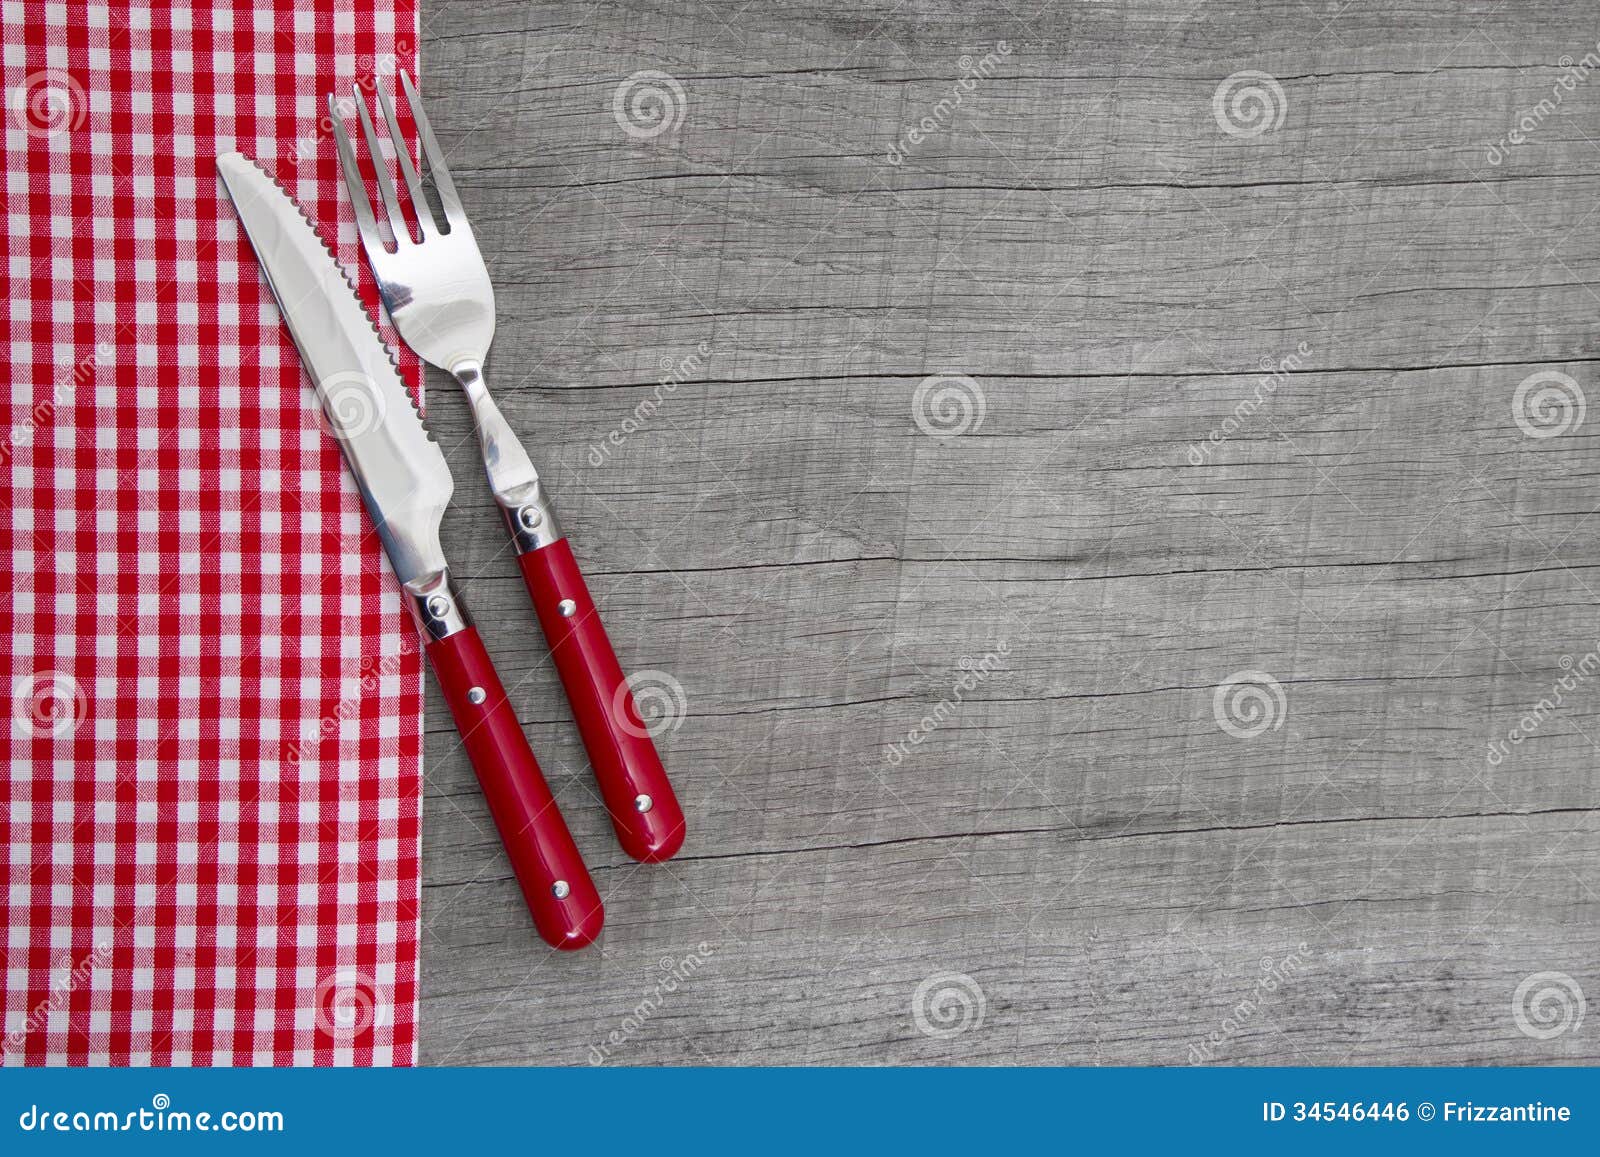 knife and fork - bavarian country style table decoration on a wooden background